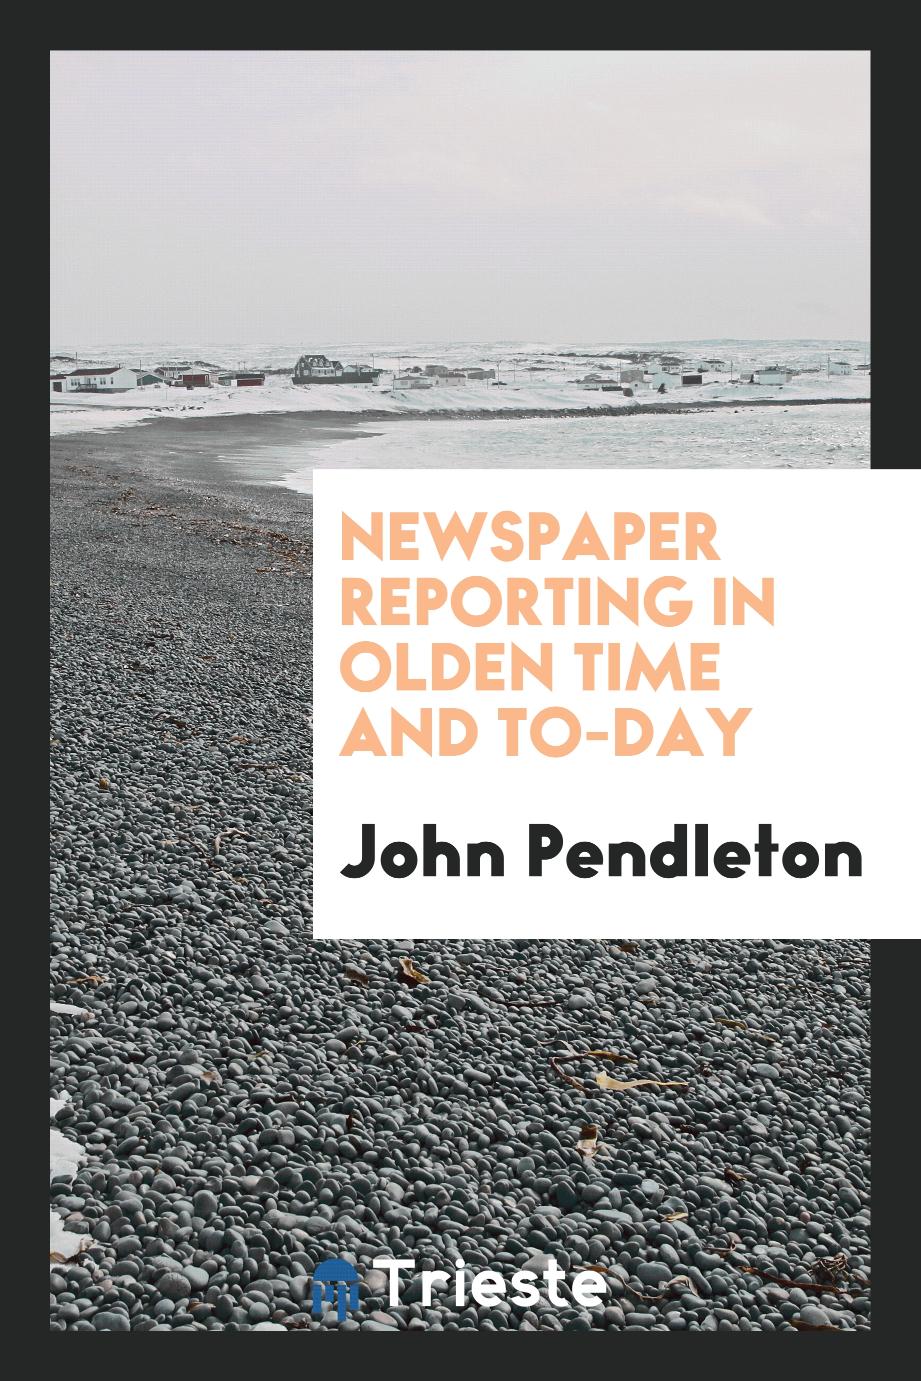 Newspaper reporting in olden time and to-day